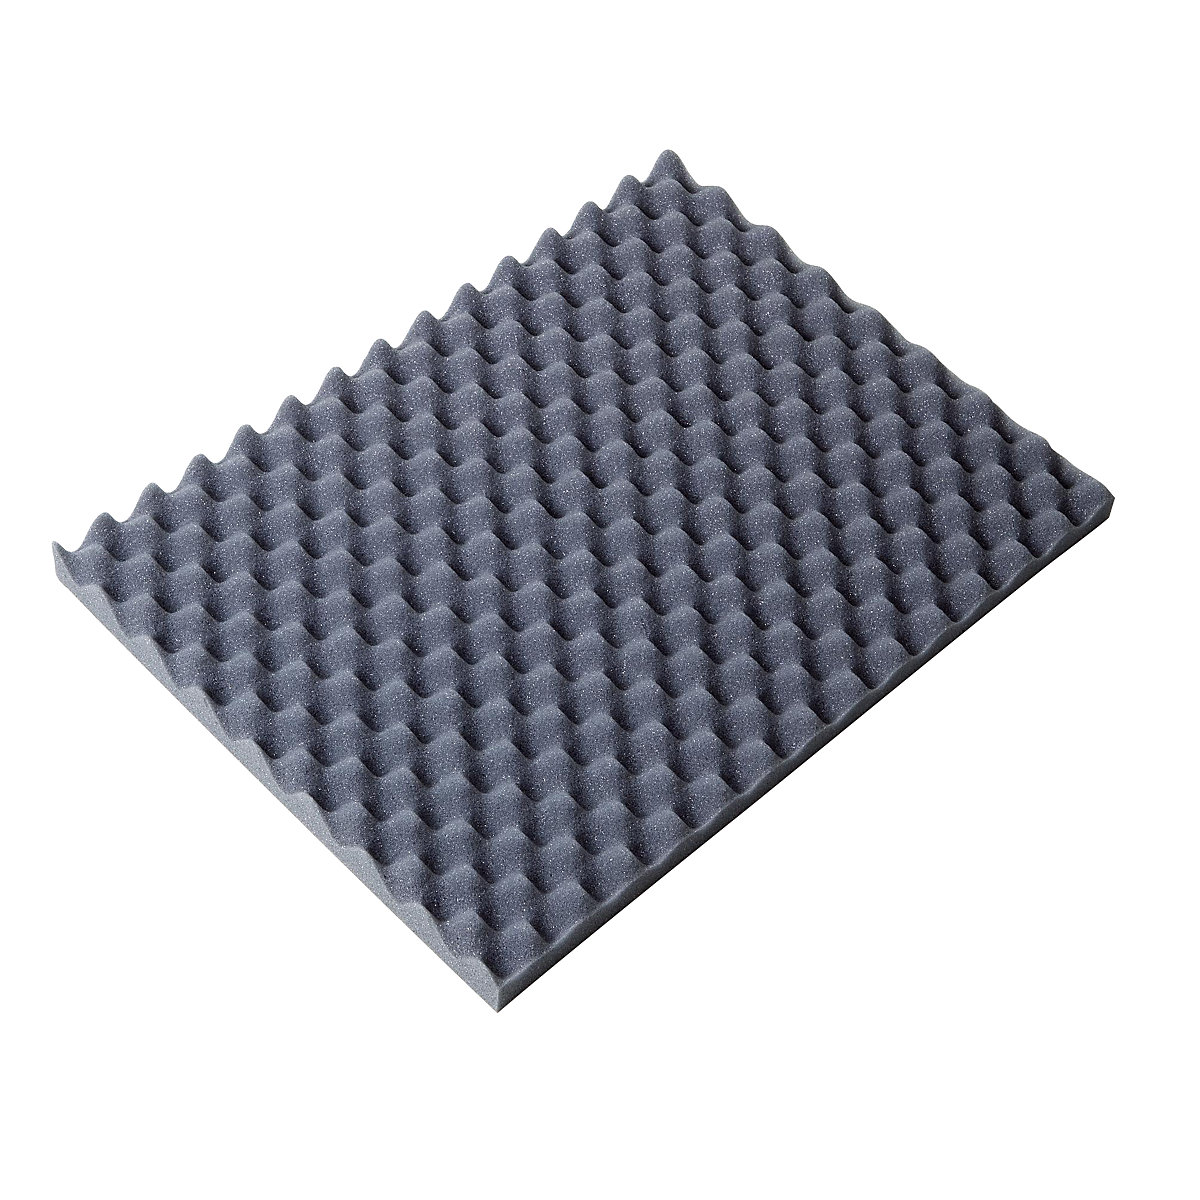 Egg crate foam sheet, 30 mm thick, LxW 400 x 300 mm, pack of 26-3